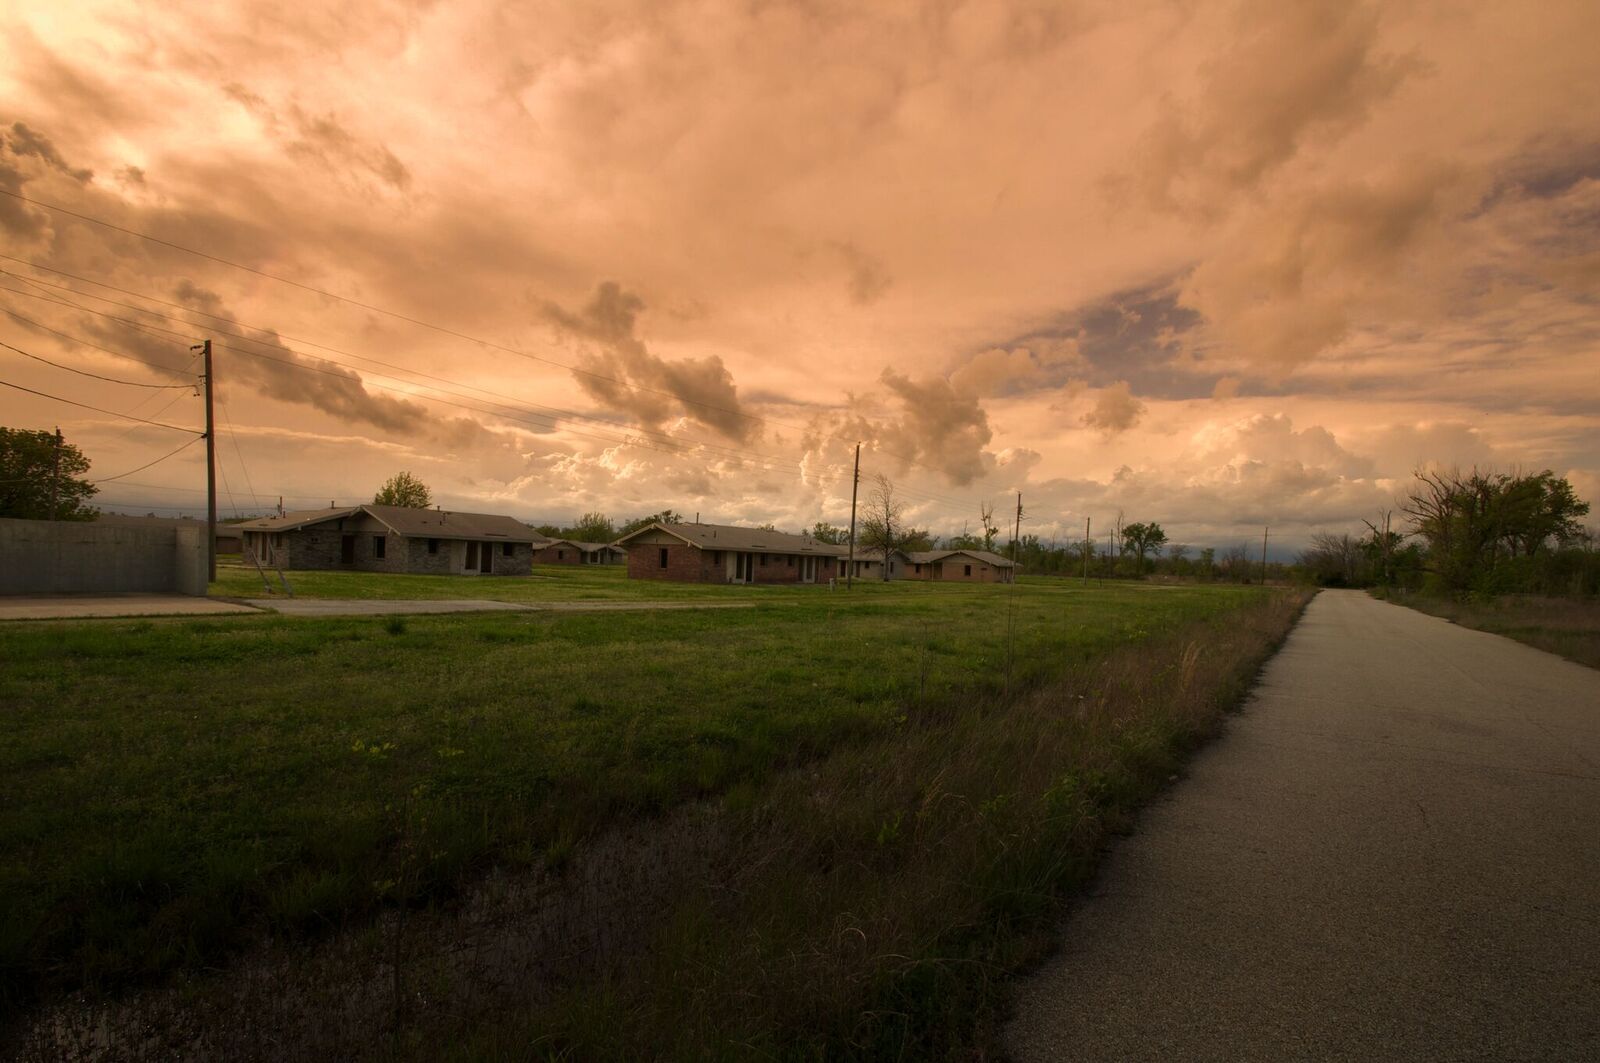 Photos Of America’s Most Toxic City Are An Ominous Warning